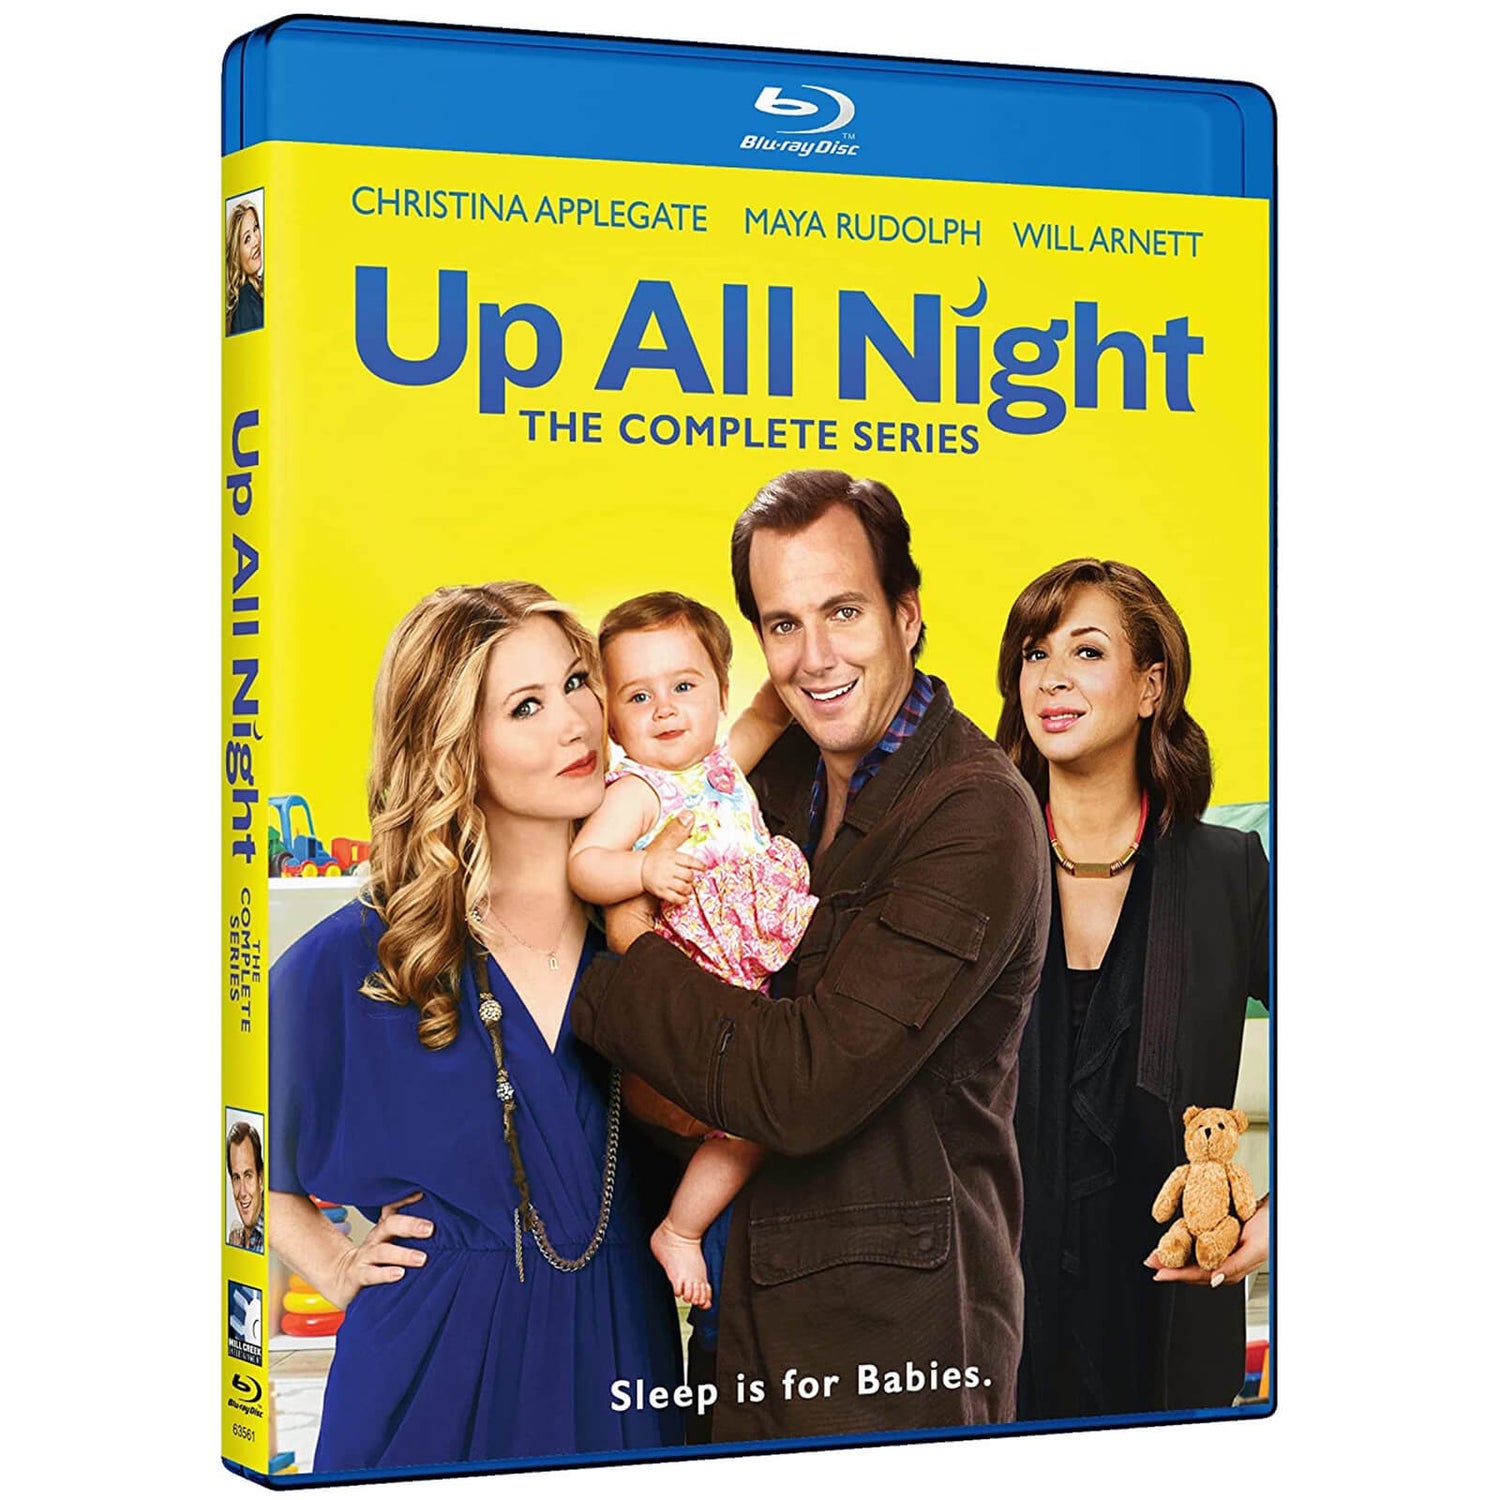 Up All Night: The Complete Series (US Import)